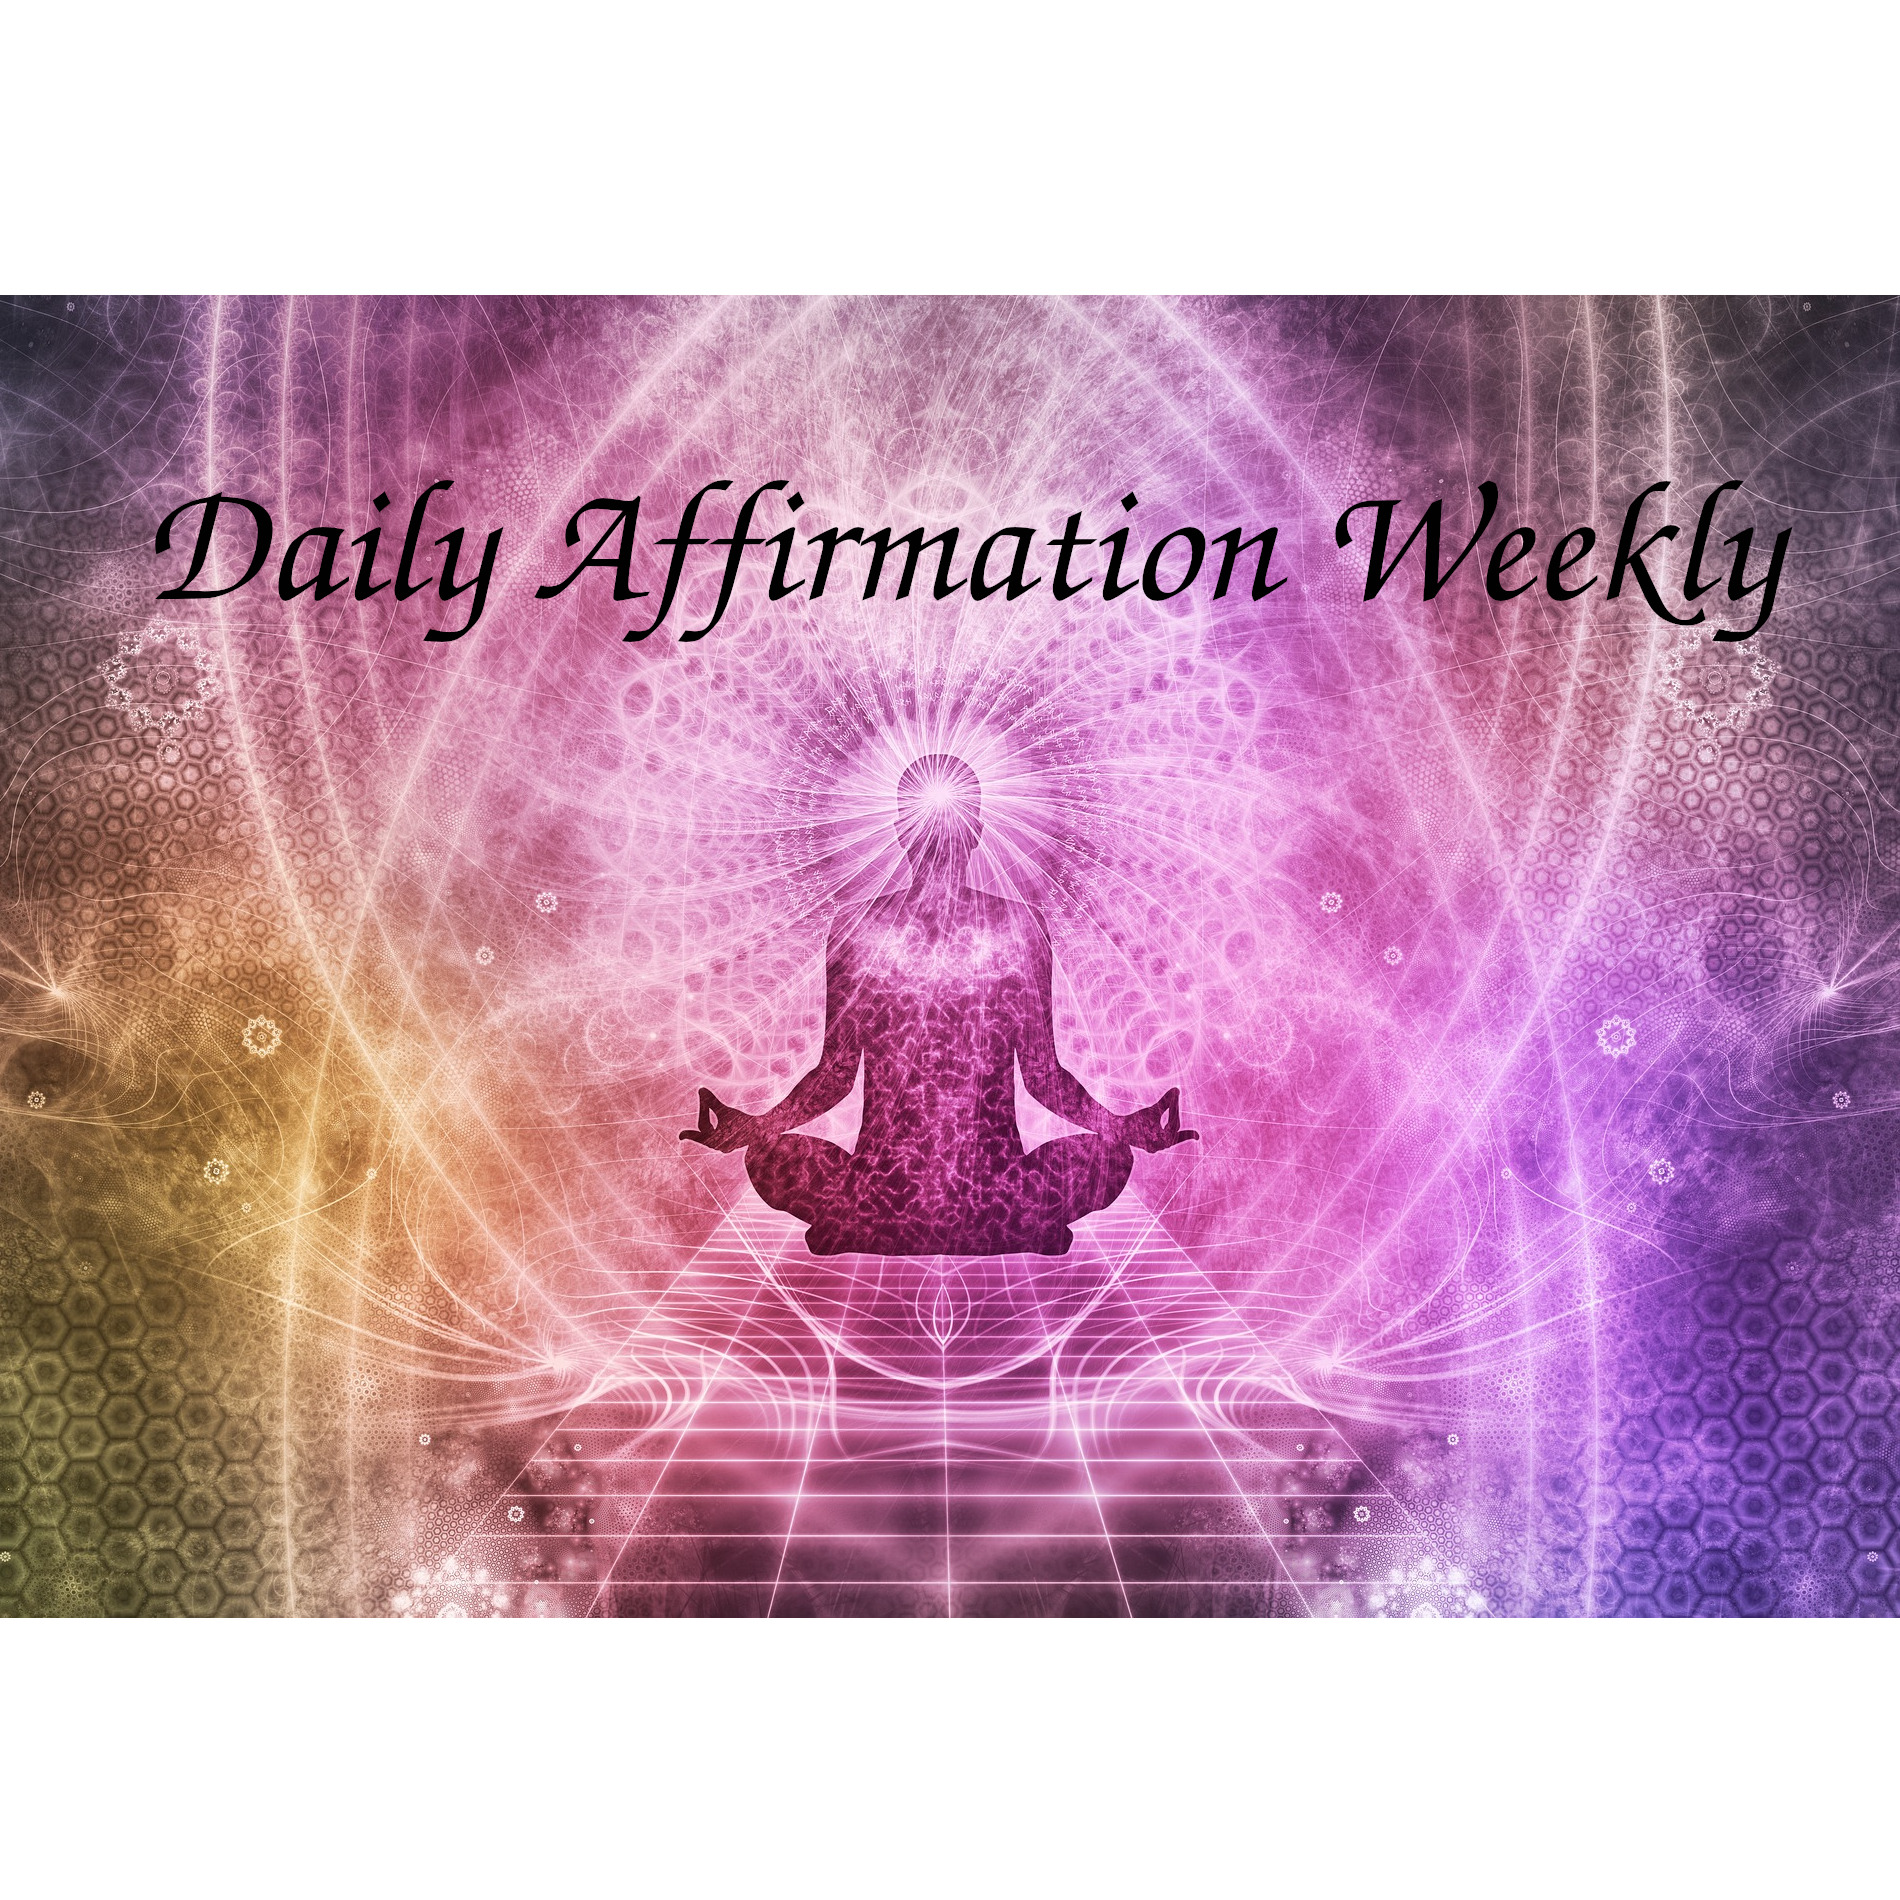 Daily Affirmations Weekly